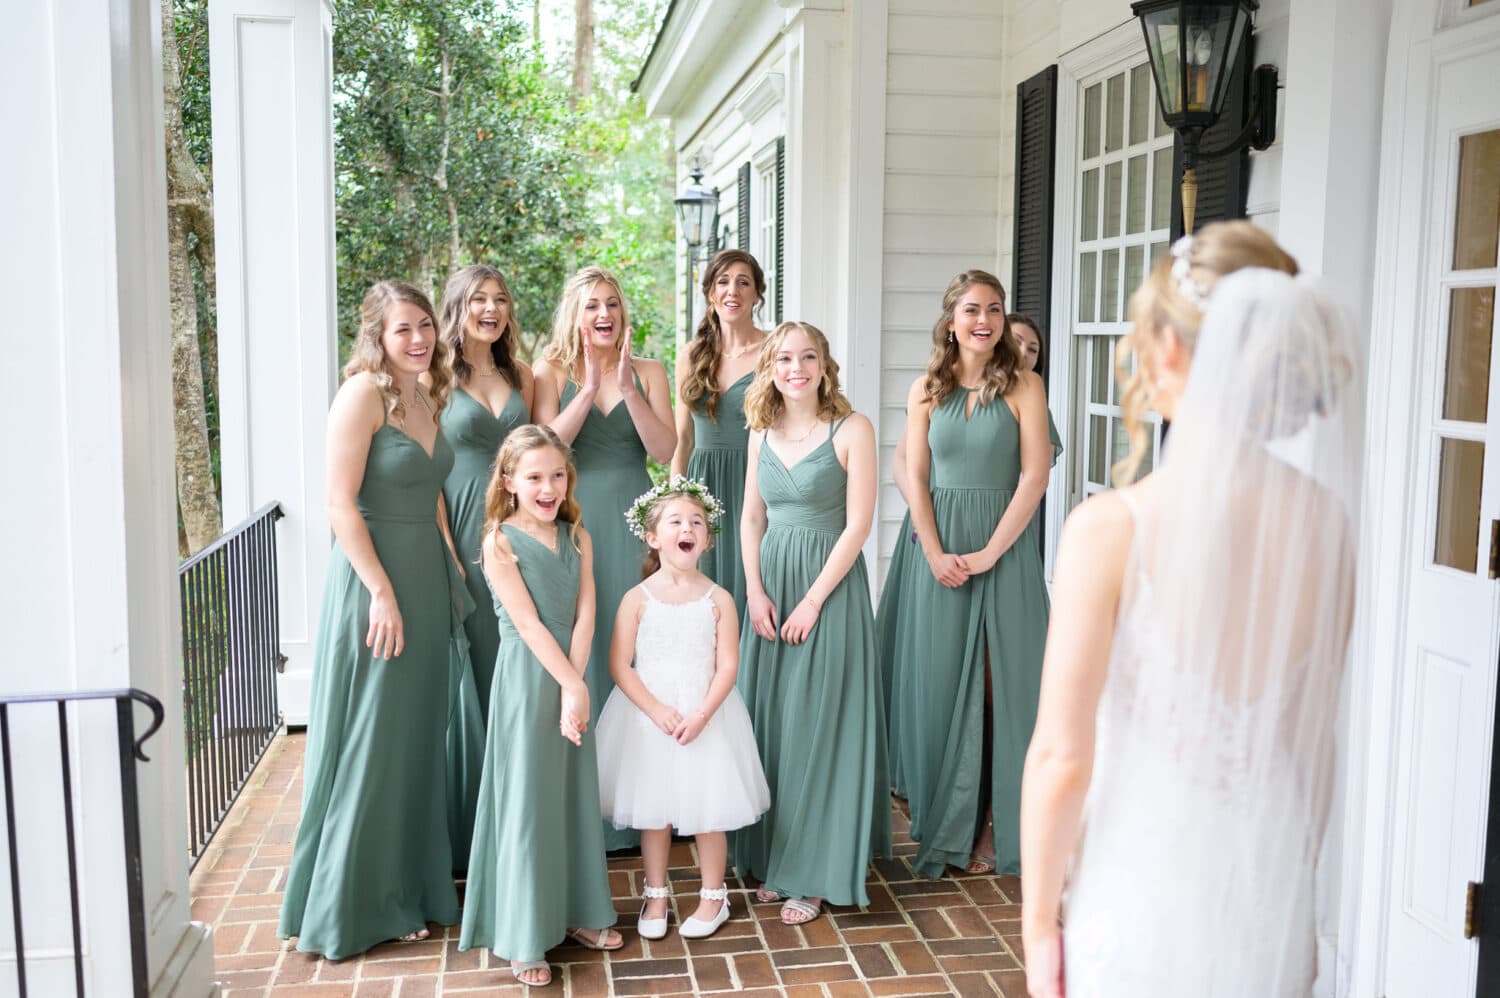 Bridesmaids first look with the bride - Pawleys Plantation Golf & Country Club